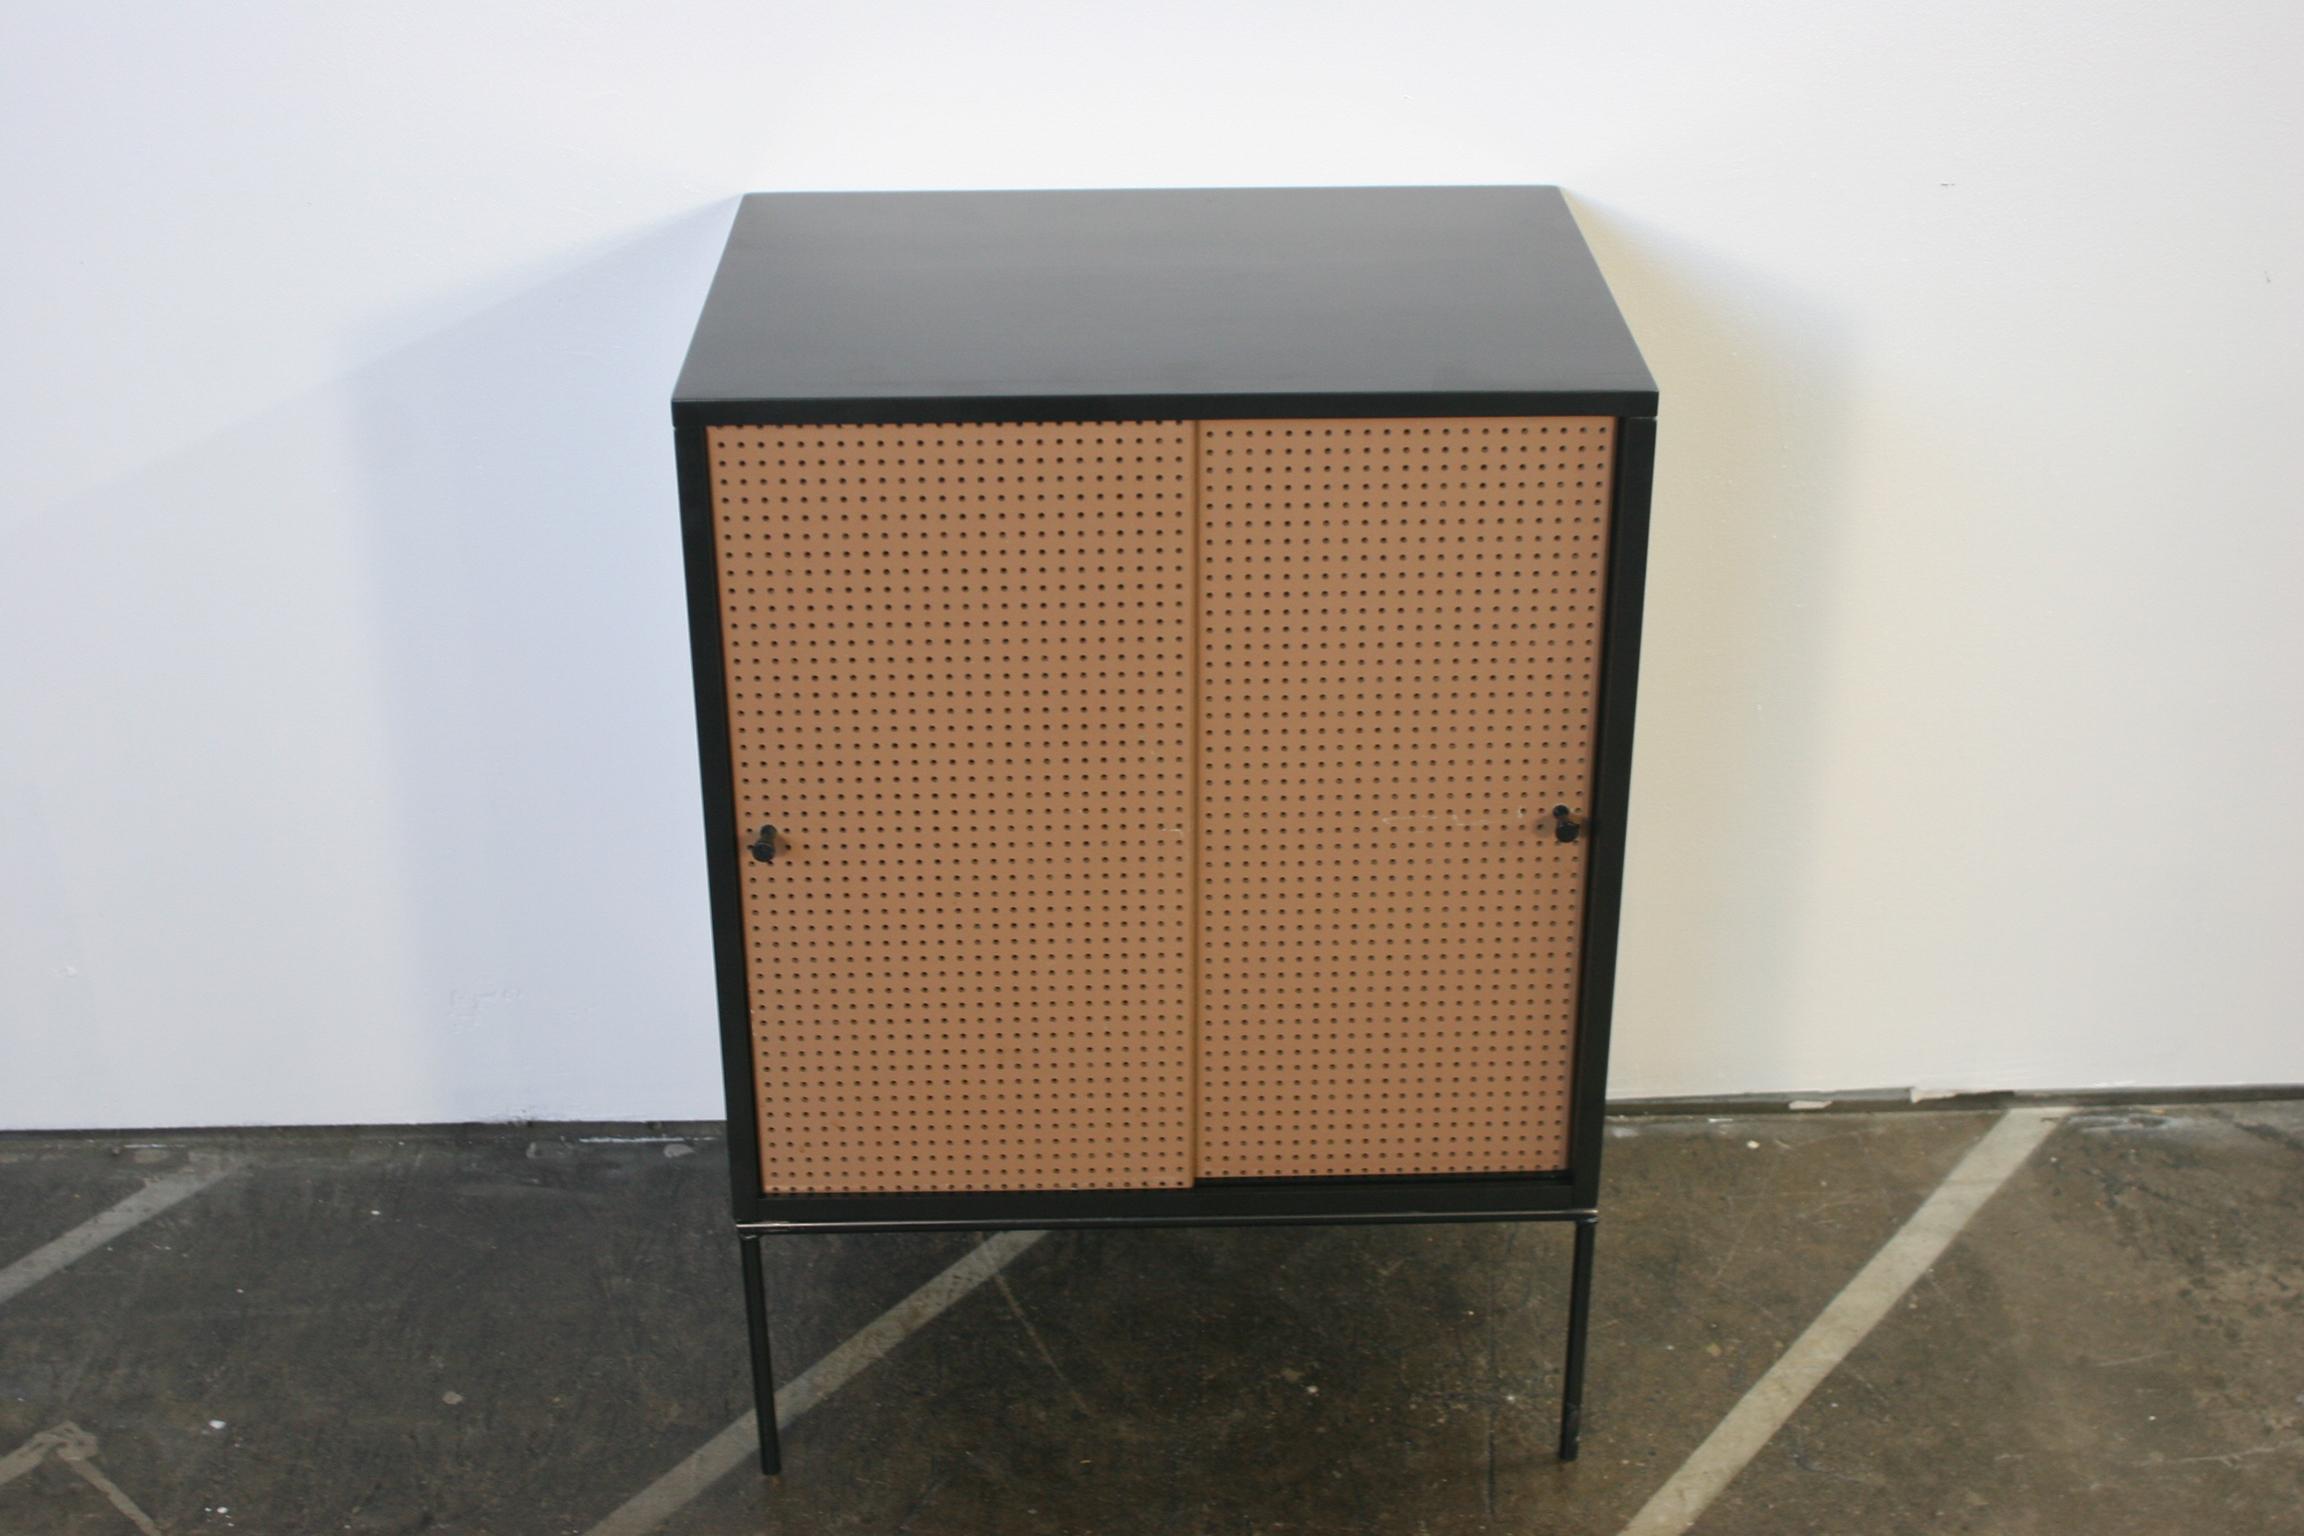 Beautiful midcentury small cabinet by Paul McCobb circa 1950 planner group #1512 has 1 shelve - solid maple construction has a black lacquer finish. Has very rare all original tan fiberglass perforated sliding front doors with black pulls sits on an